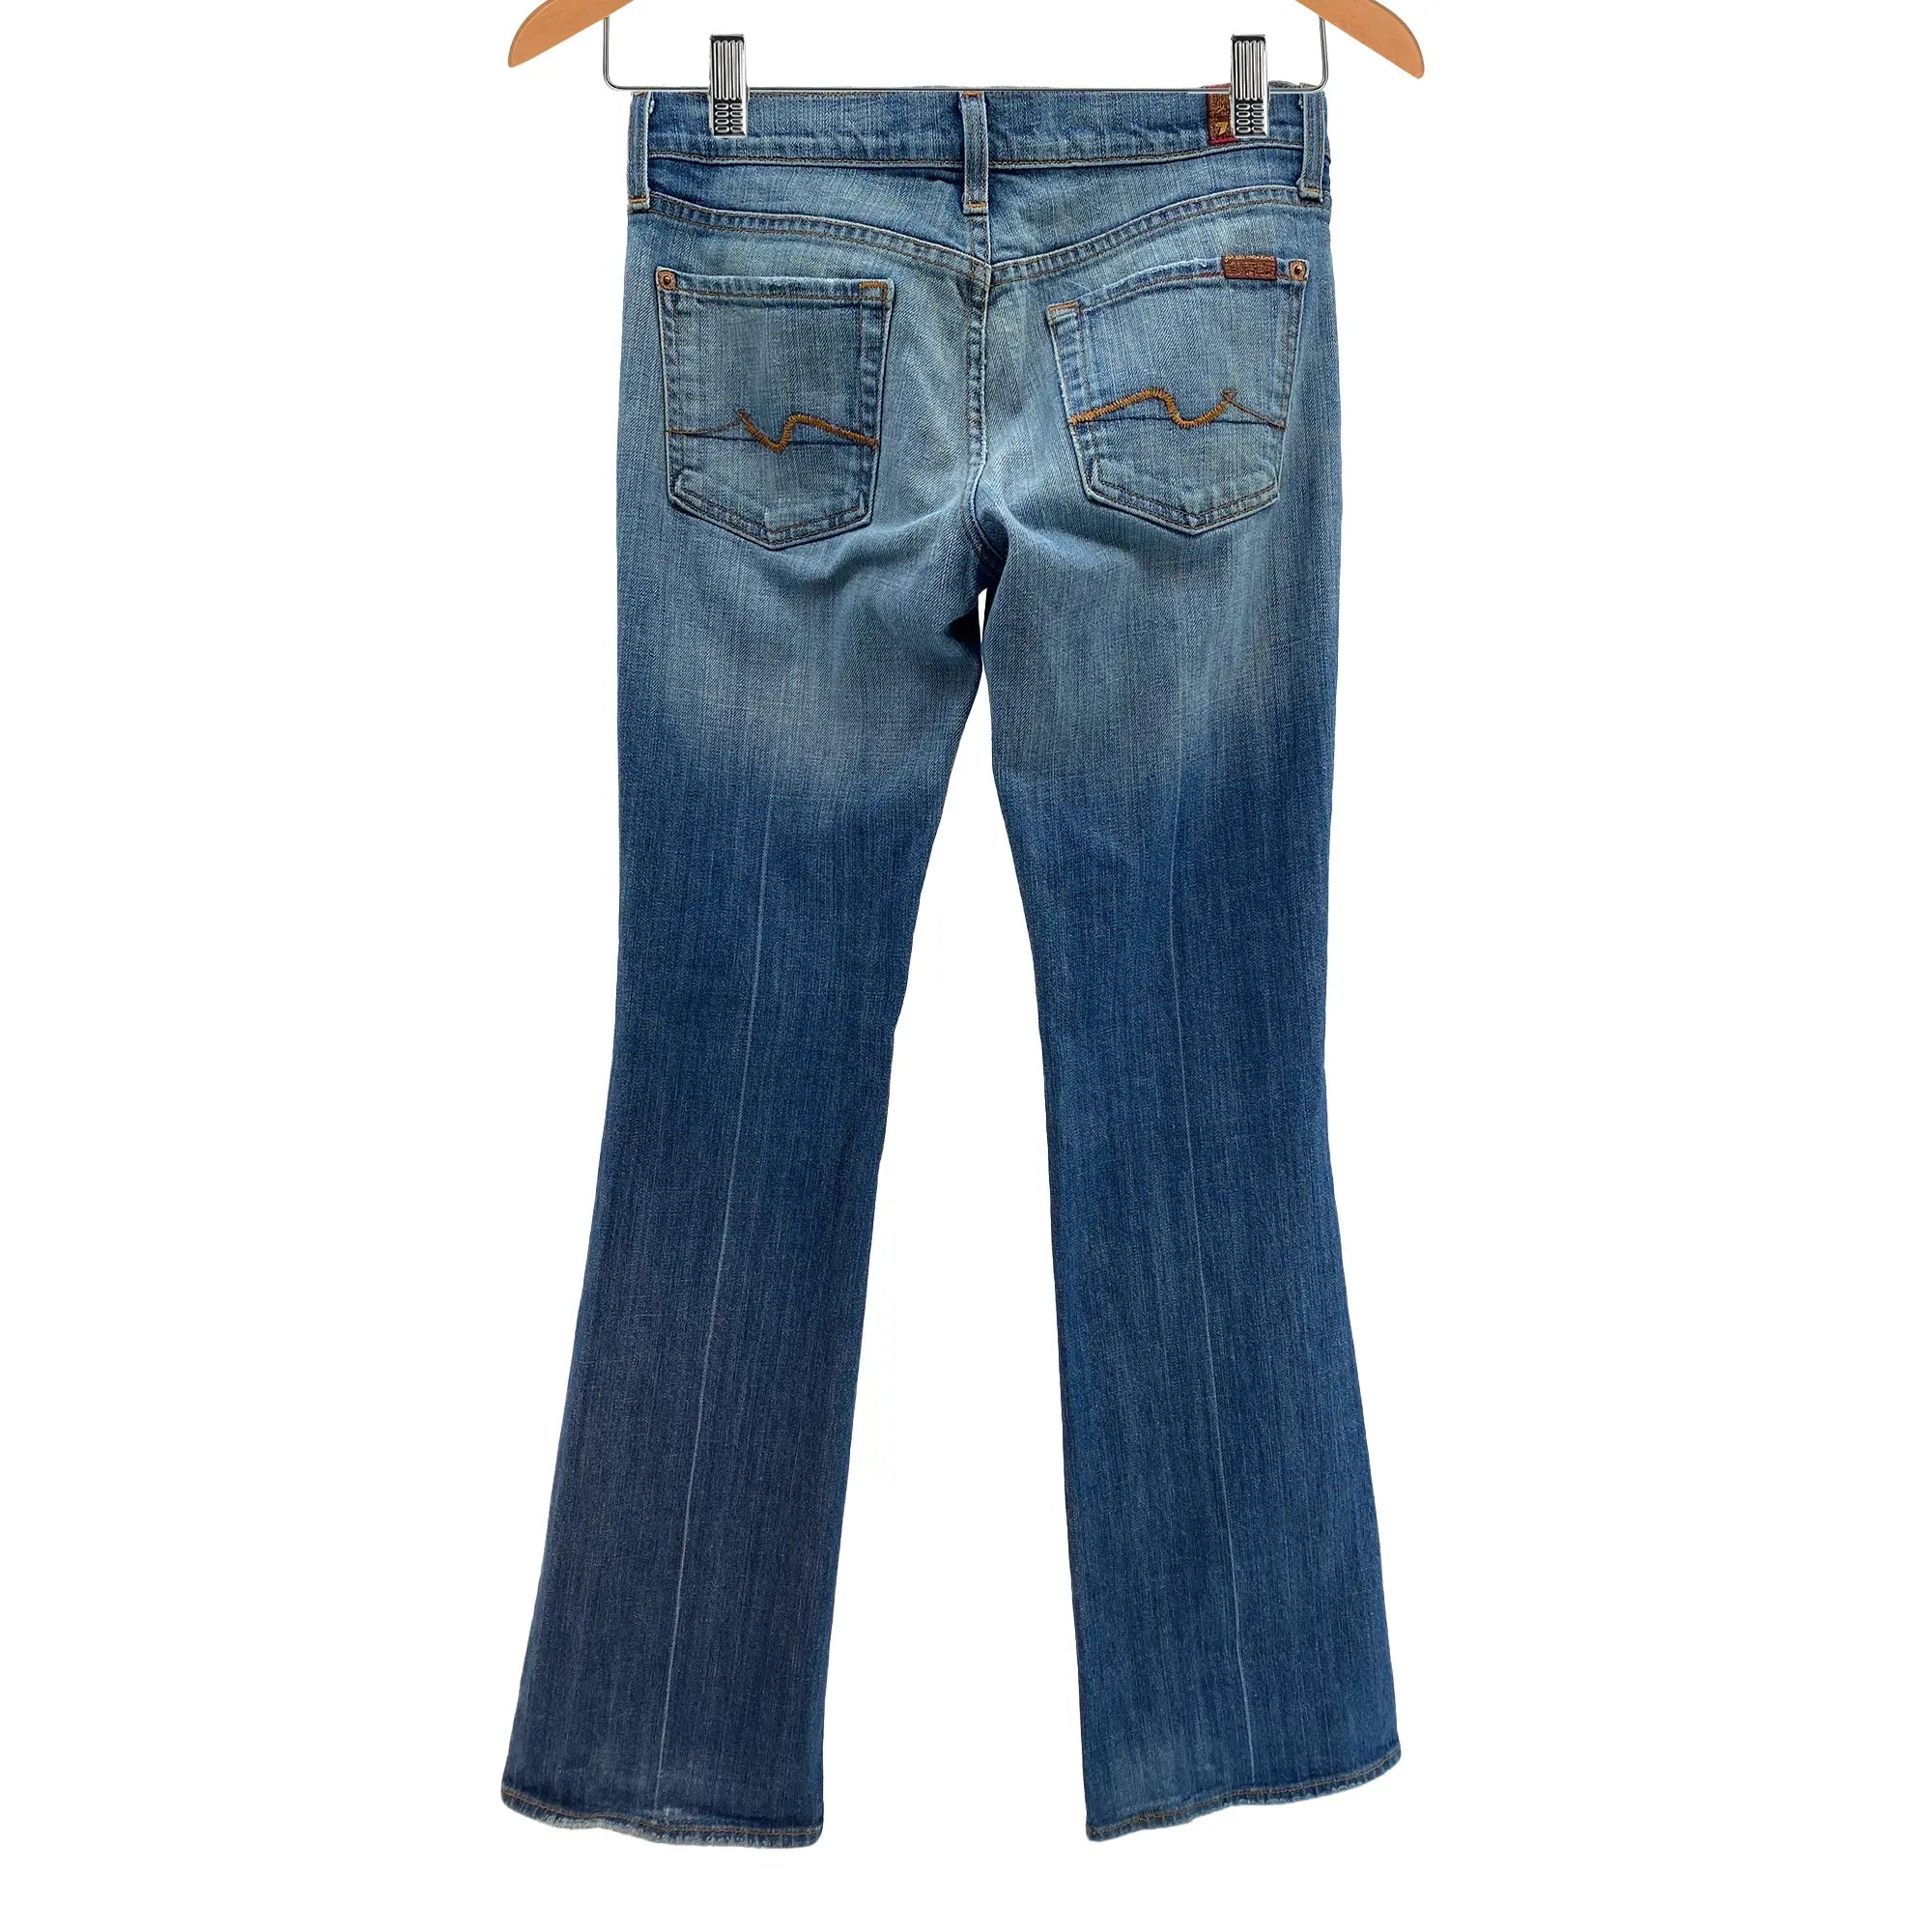 7 For All Mankind - Bootcut - Women's 28 Great Lakes Reclaimed Denim